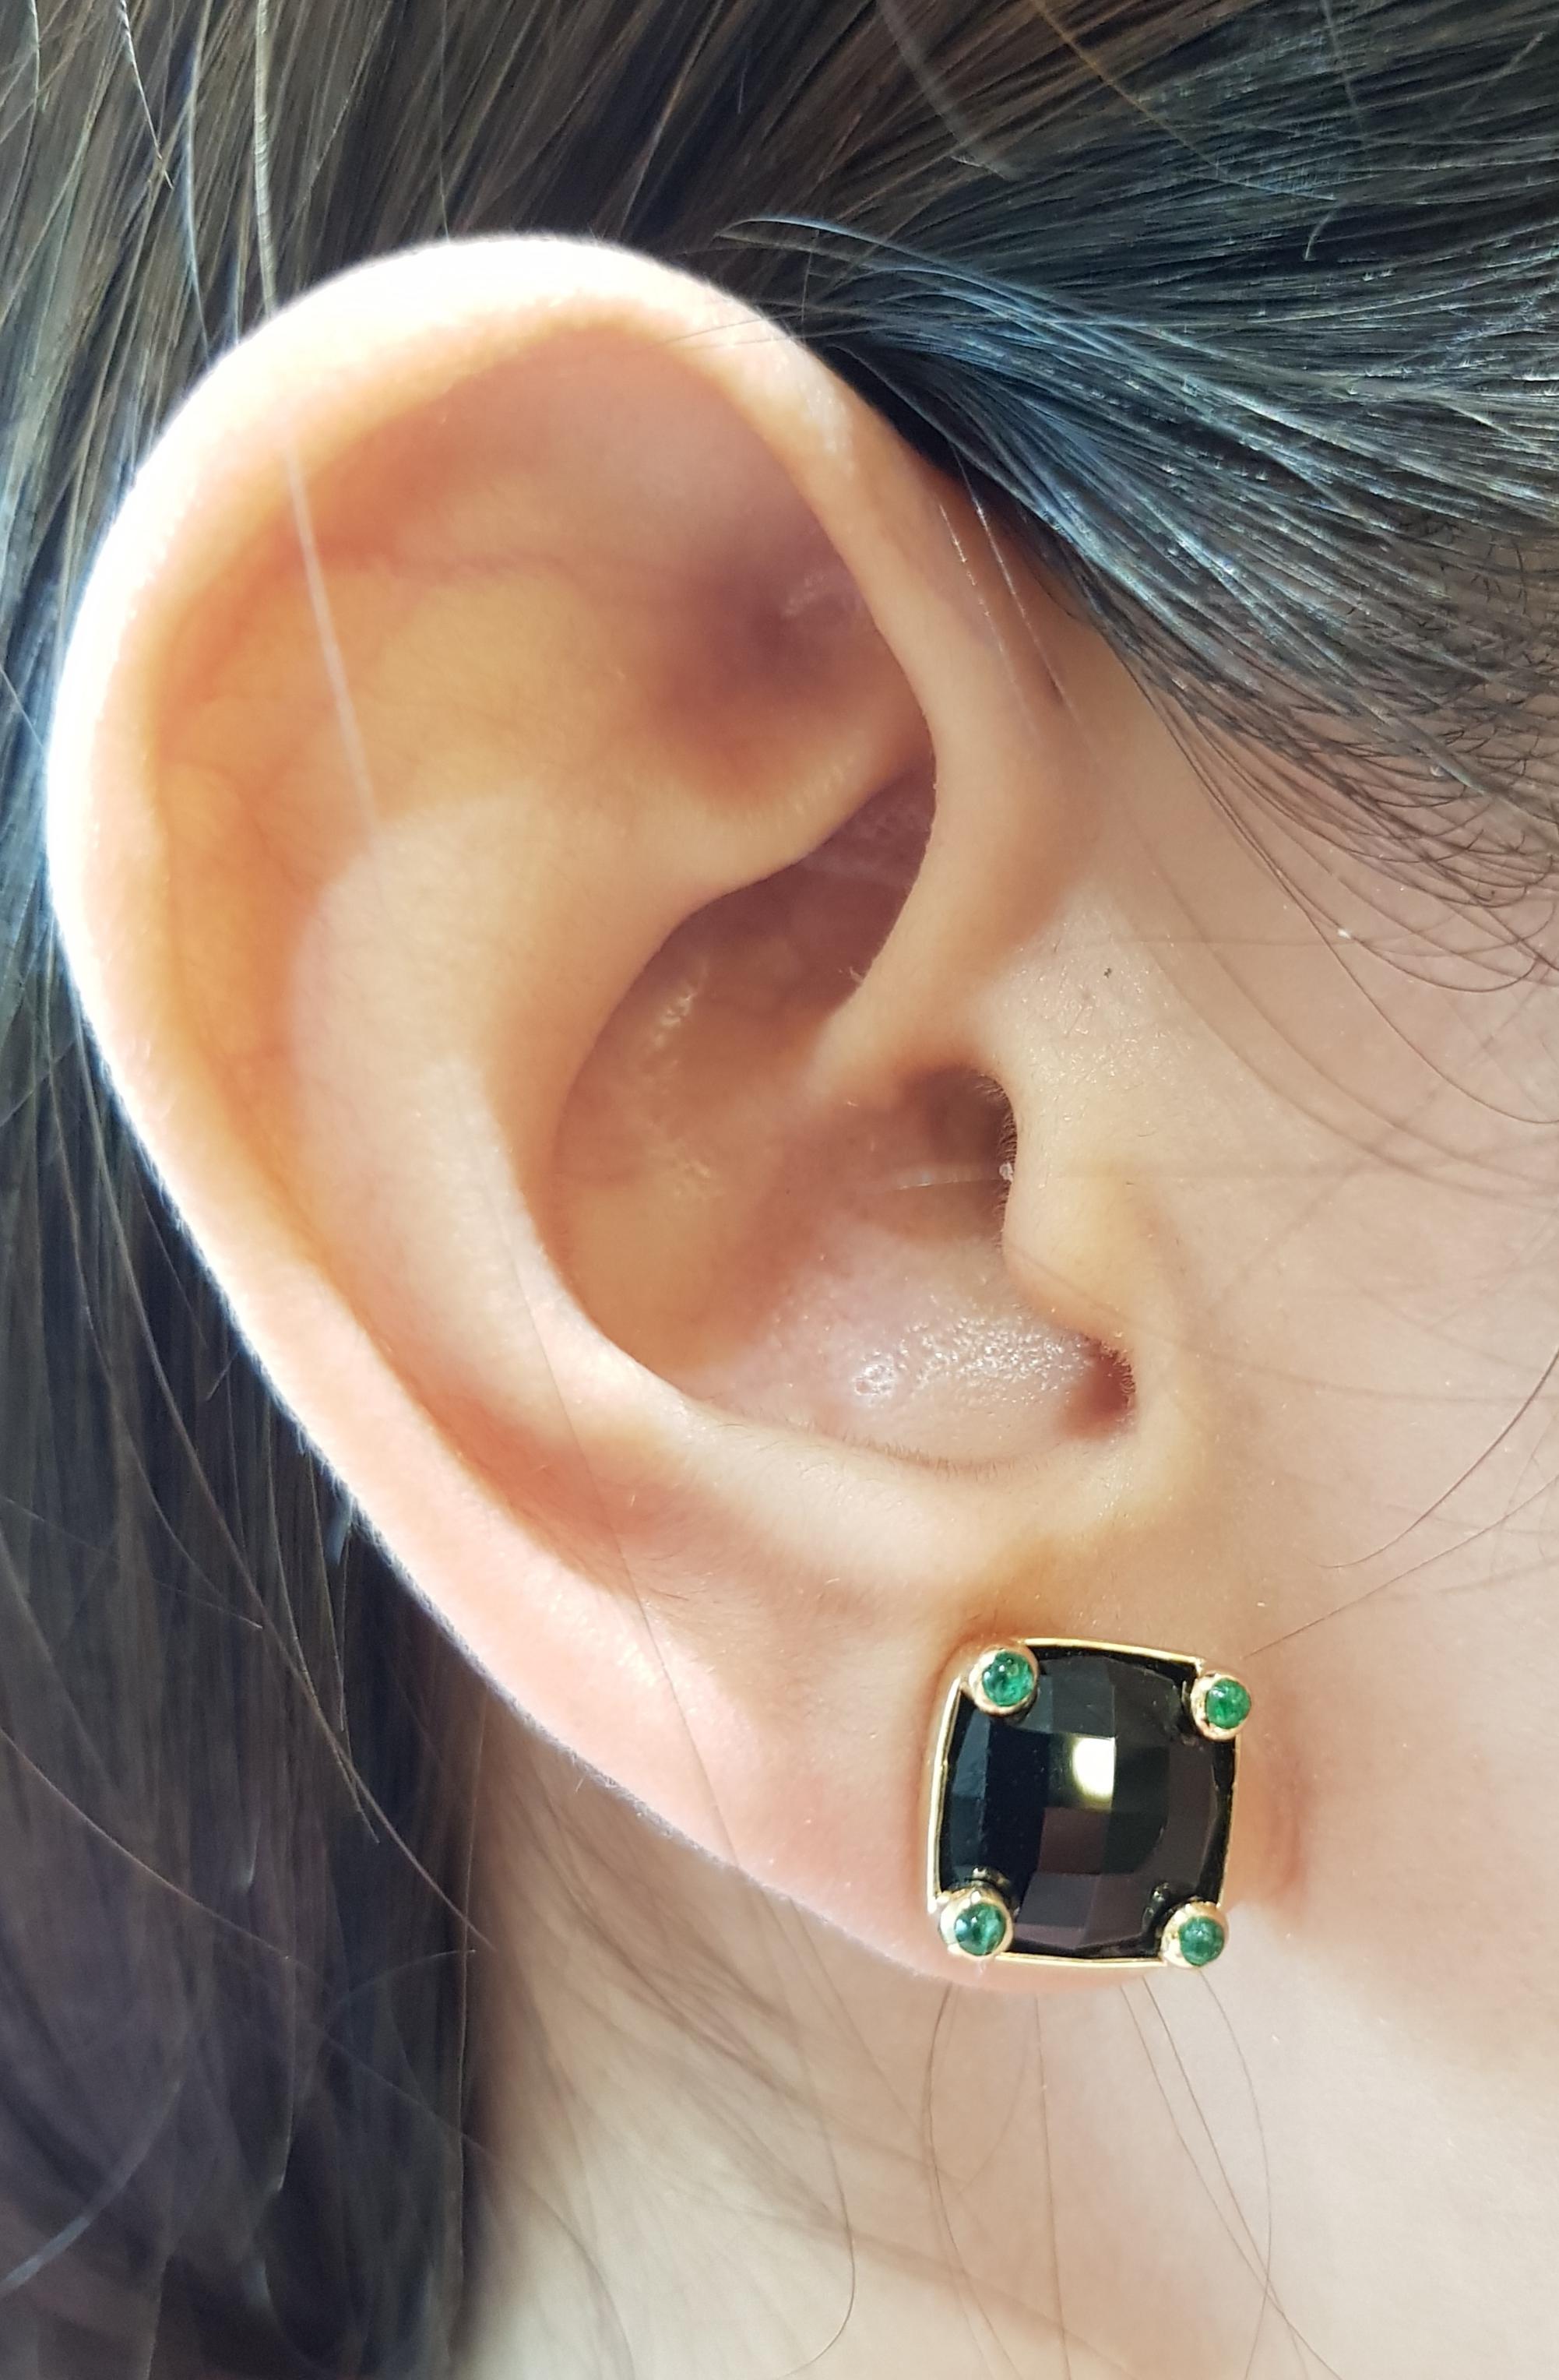 Onyx with Cabochon Emerald 0.18 carat Earrings set in 18 Karat Gold Settings

Width:  1.0 cm 
Length:  1.0 cm
Total Weight: 5.61 grams

